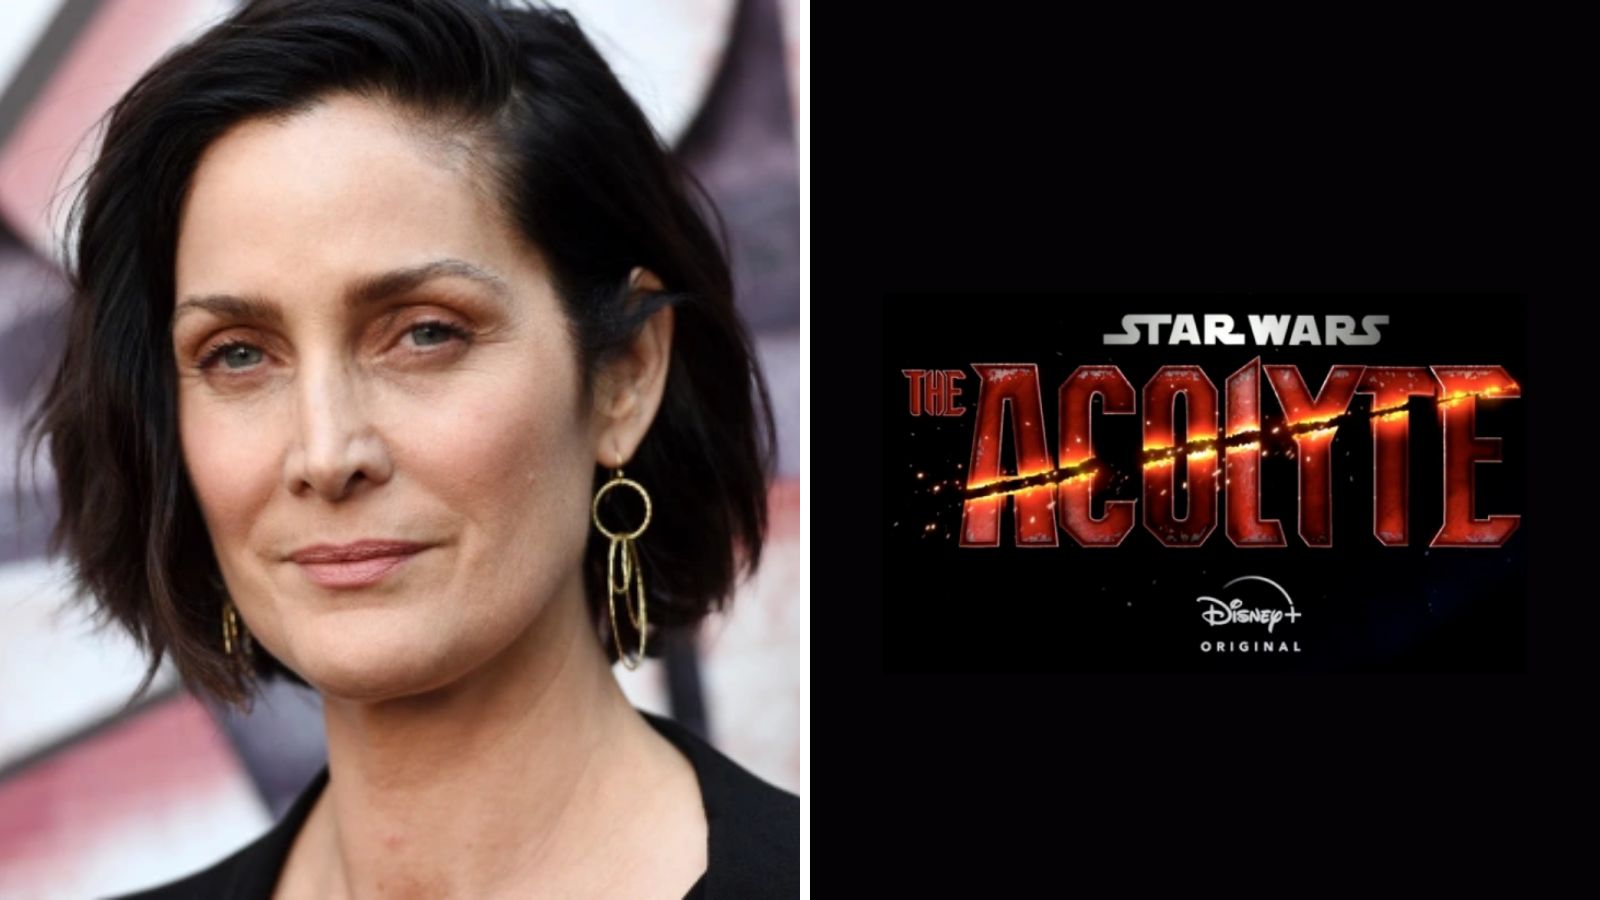 Carrie-Anne Moss Star Wars The Acolyte